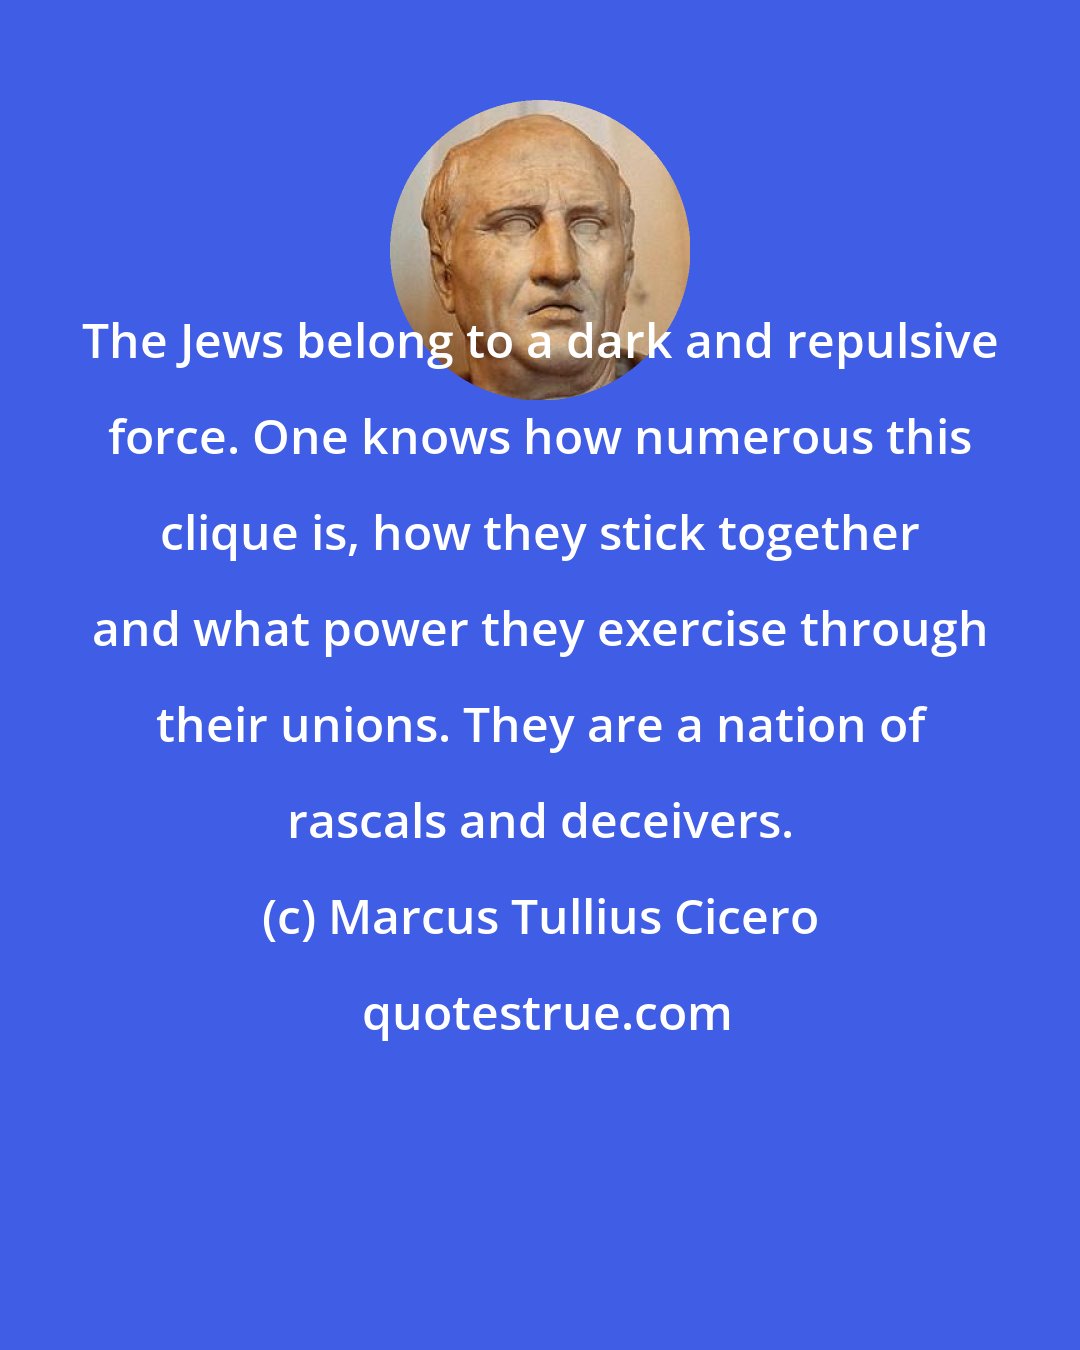 Marcus Tullius Cicero: The Jews belong to a dark and repulsive force. One knows how numerous this clique is, how they stick together and what power they exercise through their unions. They are a nation of rascals and deceivers.